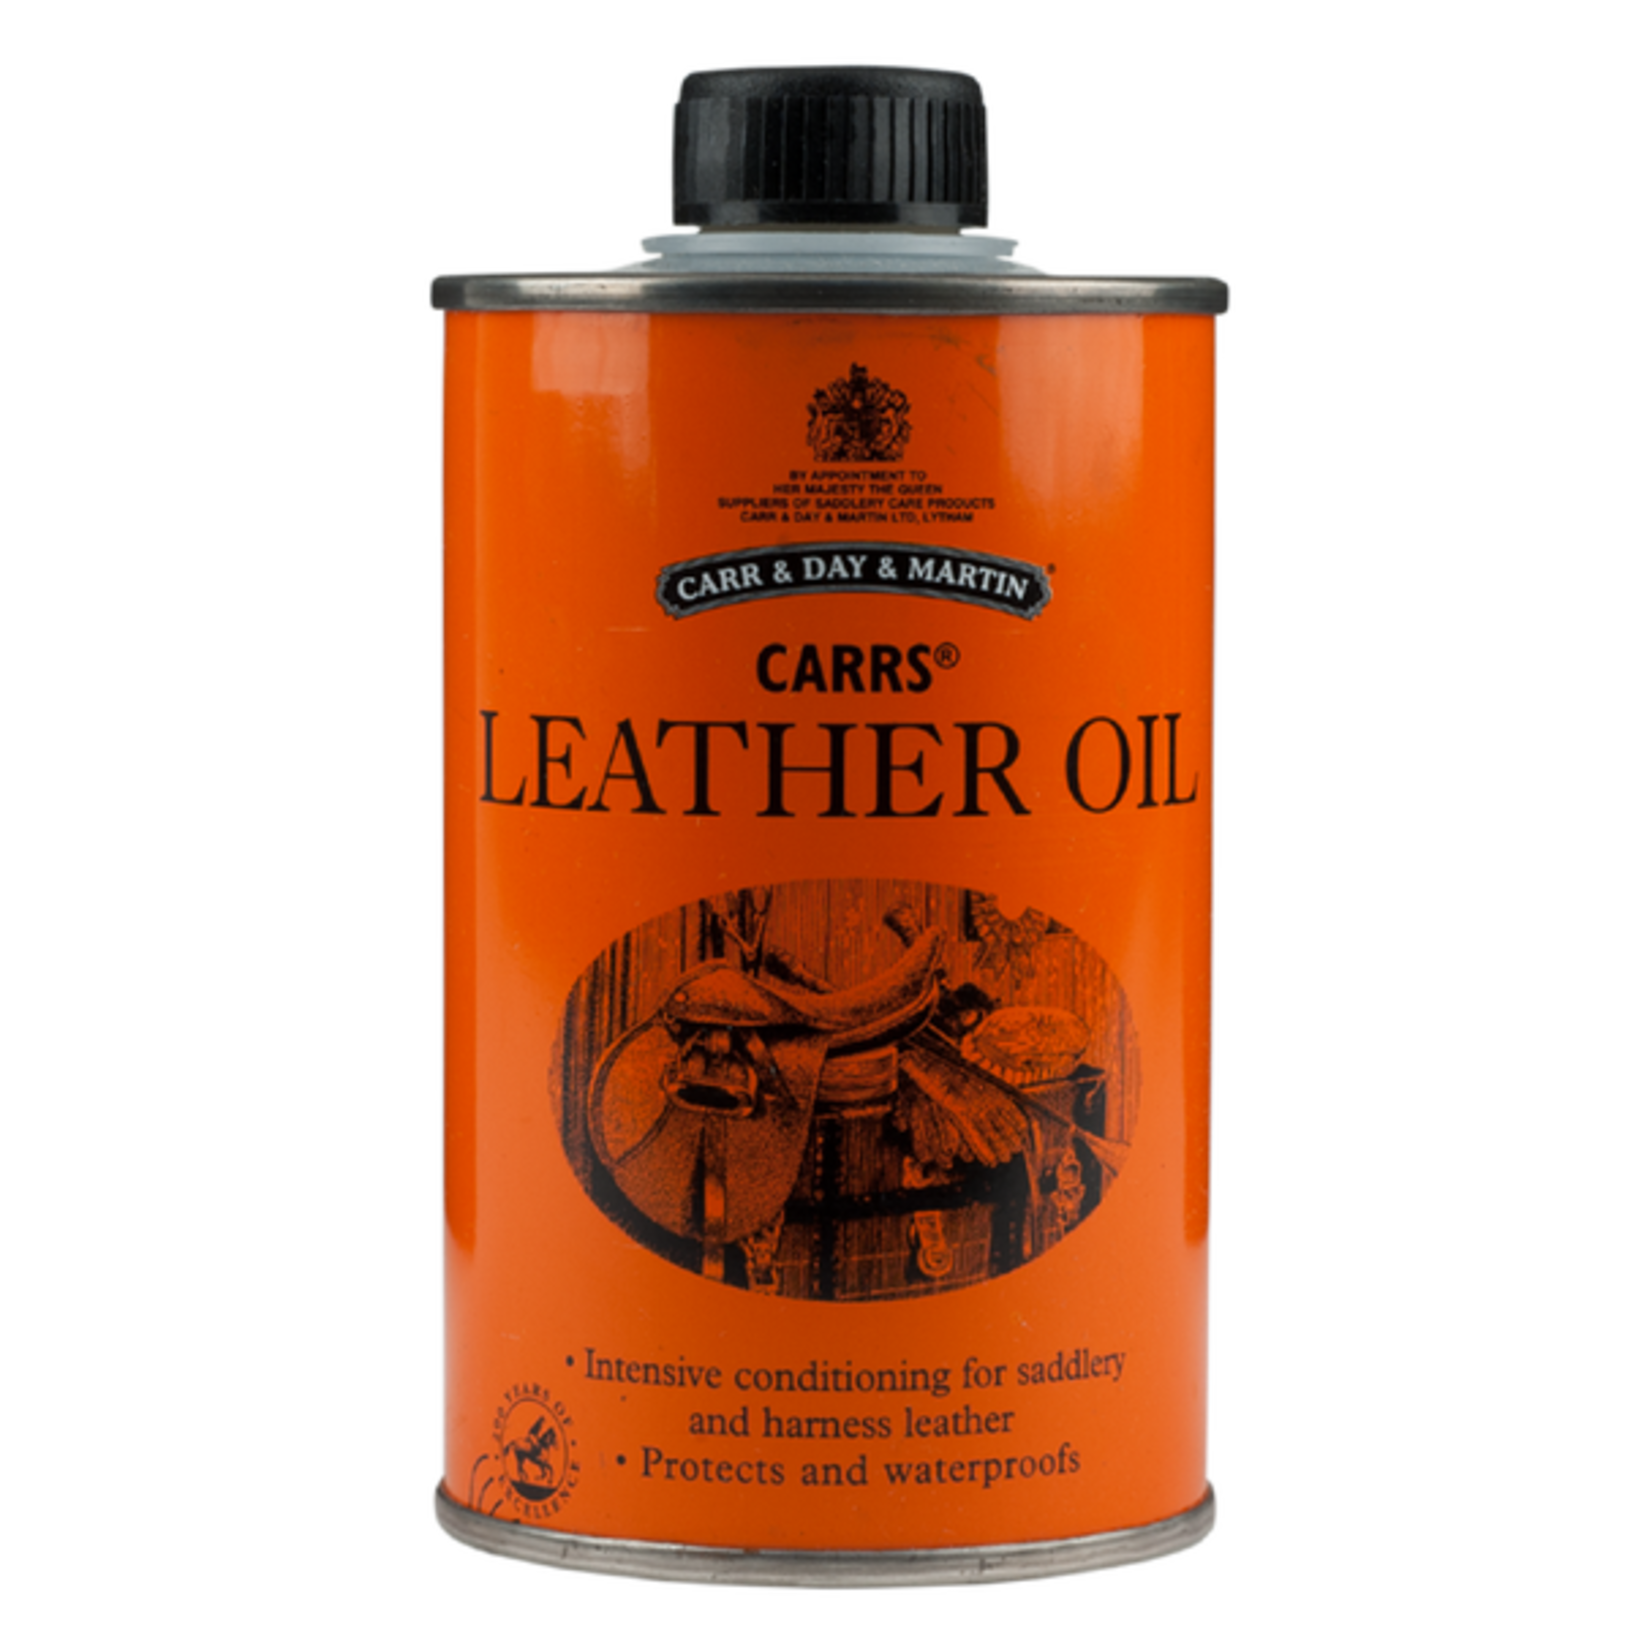 Carr & Day & Martin Carr & Day & Martin Leather Oil